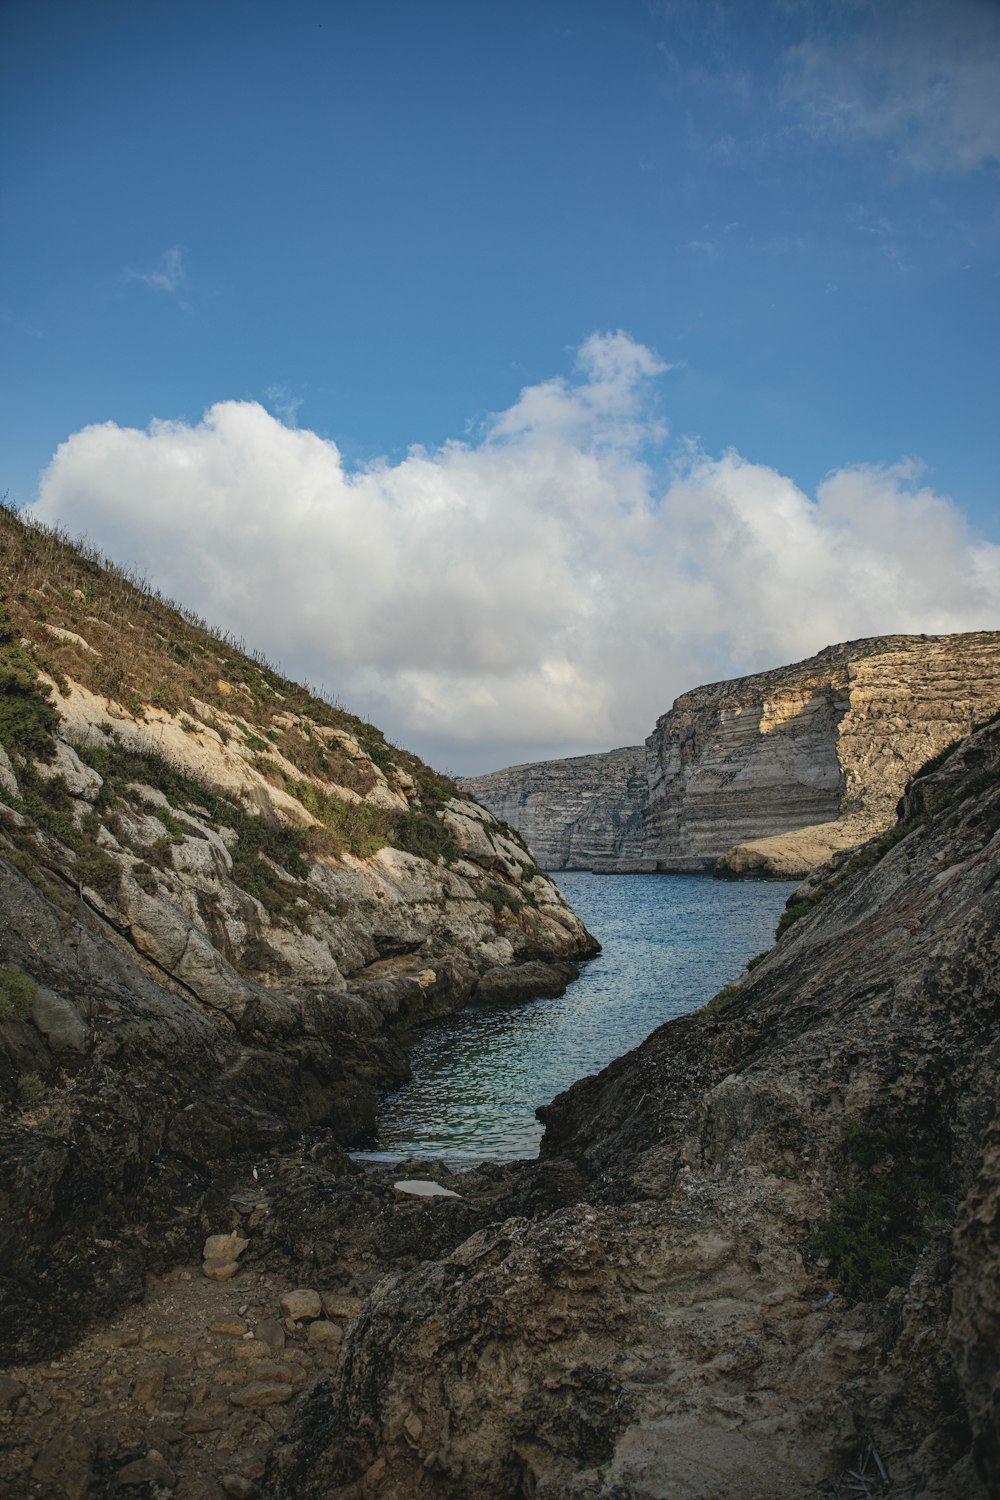 a body of water between rocky hills